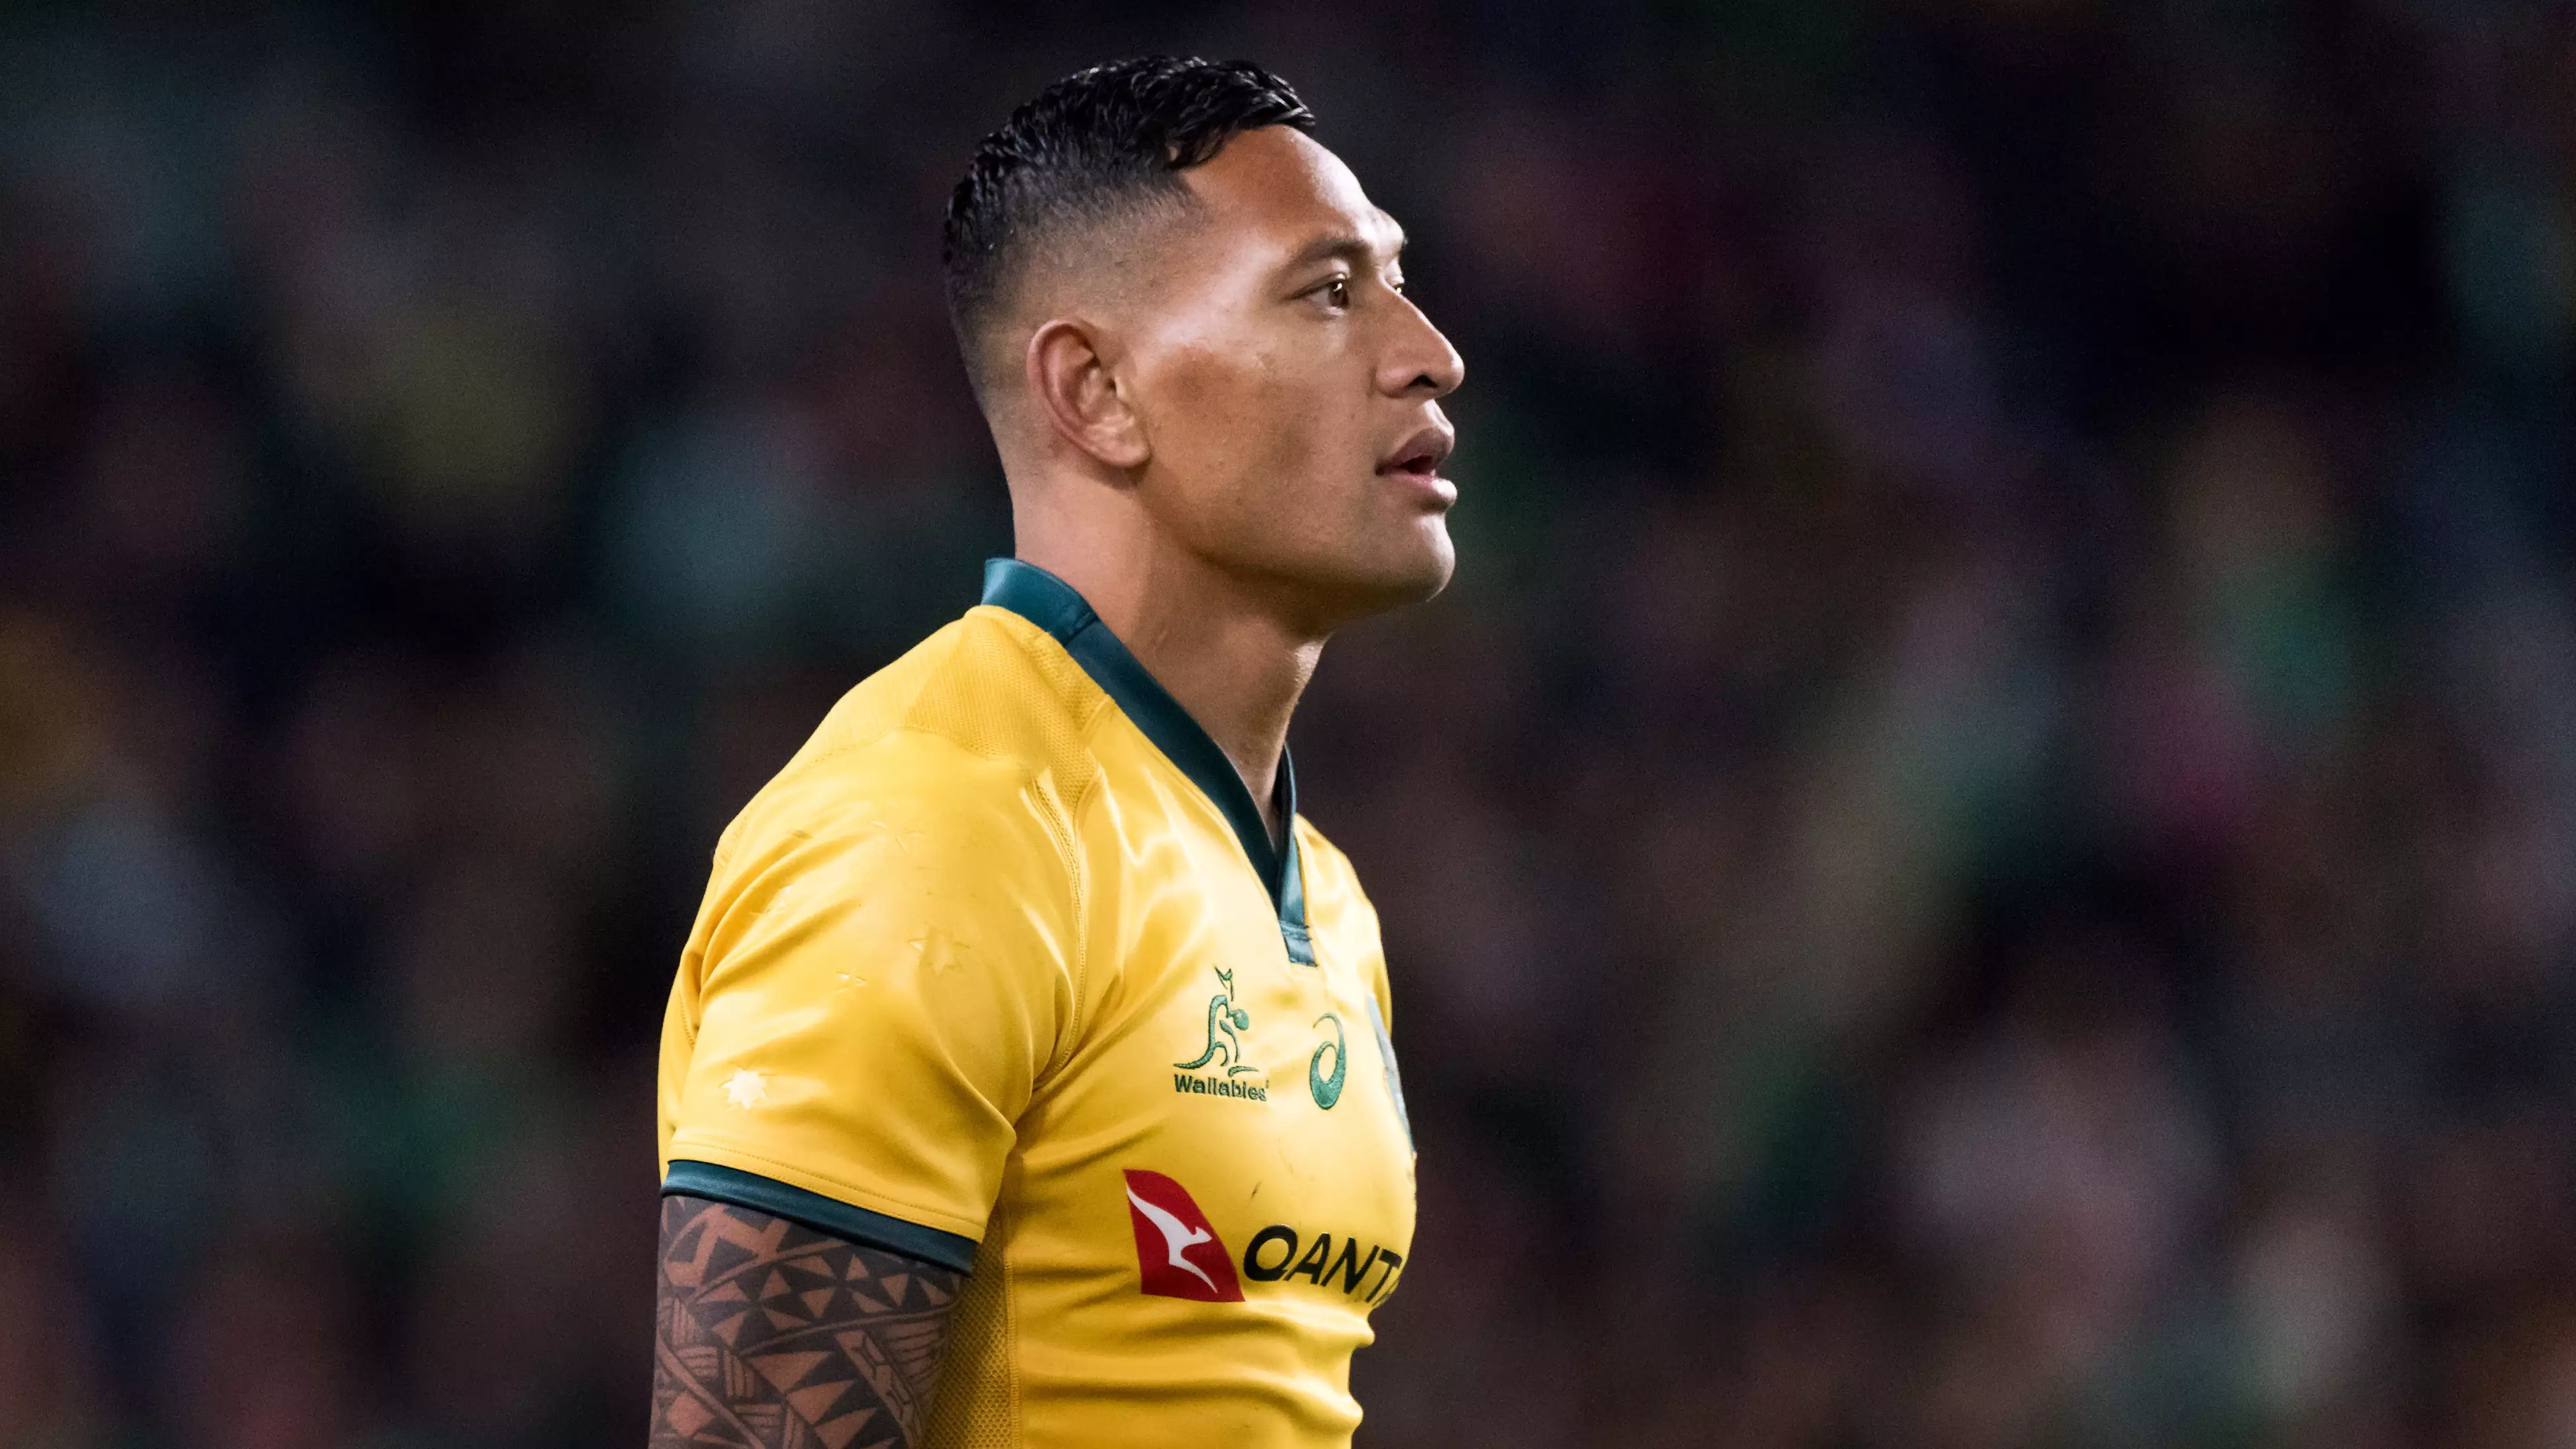 Israel Folau Challenges Rugby Australia's Punishment Over Anti-Gay Post